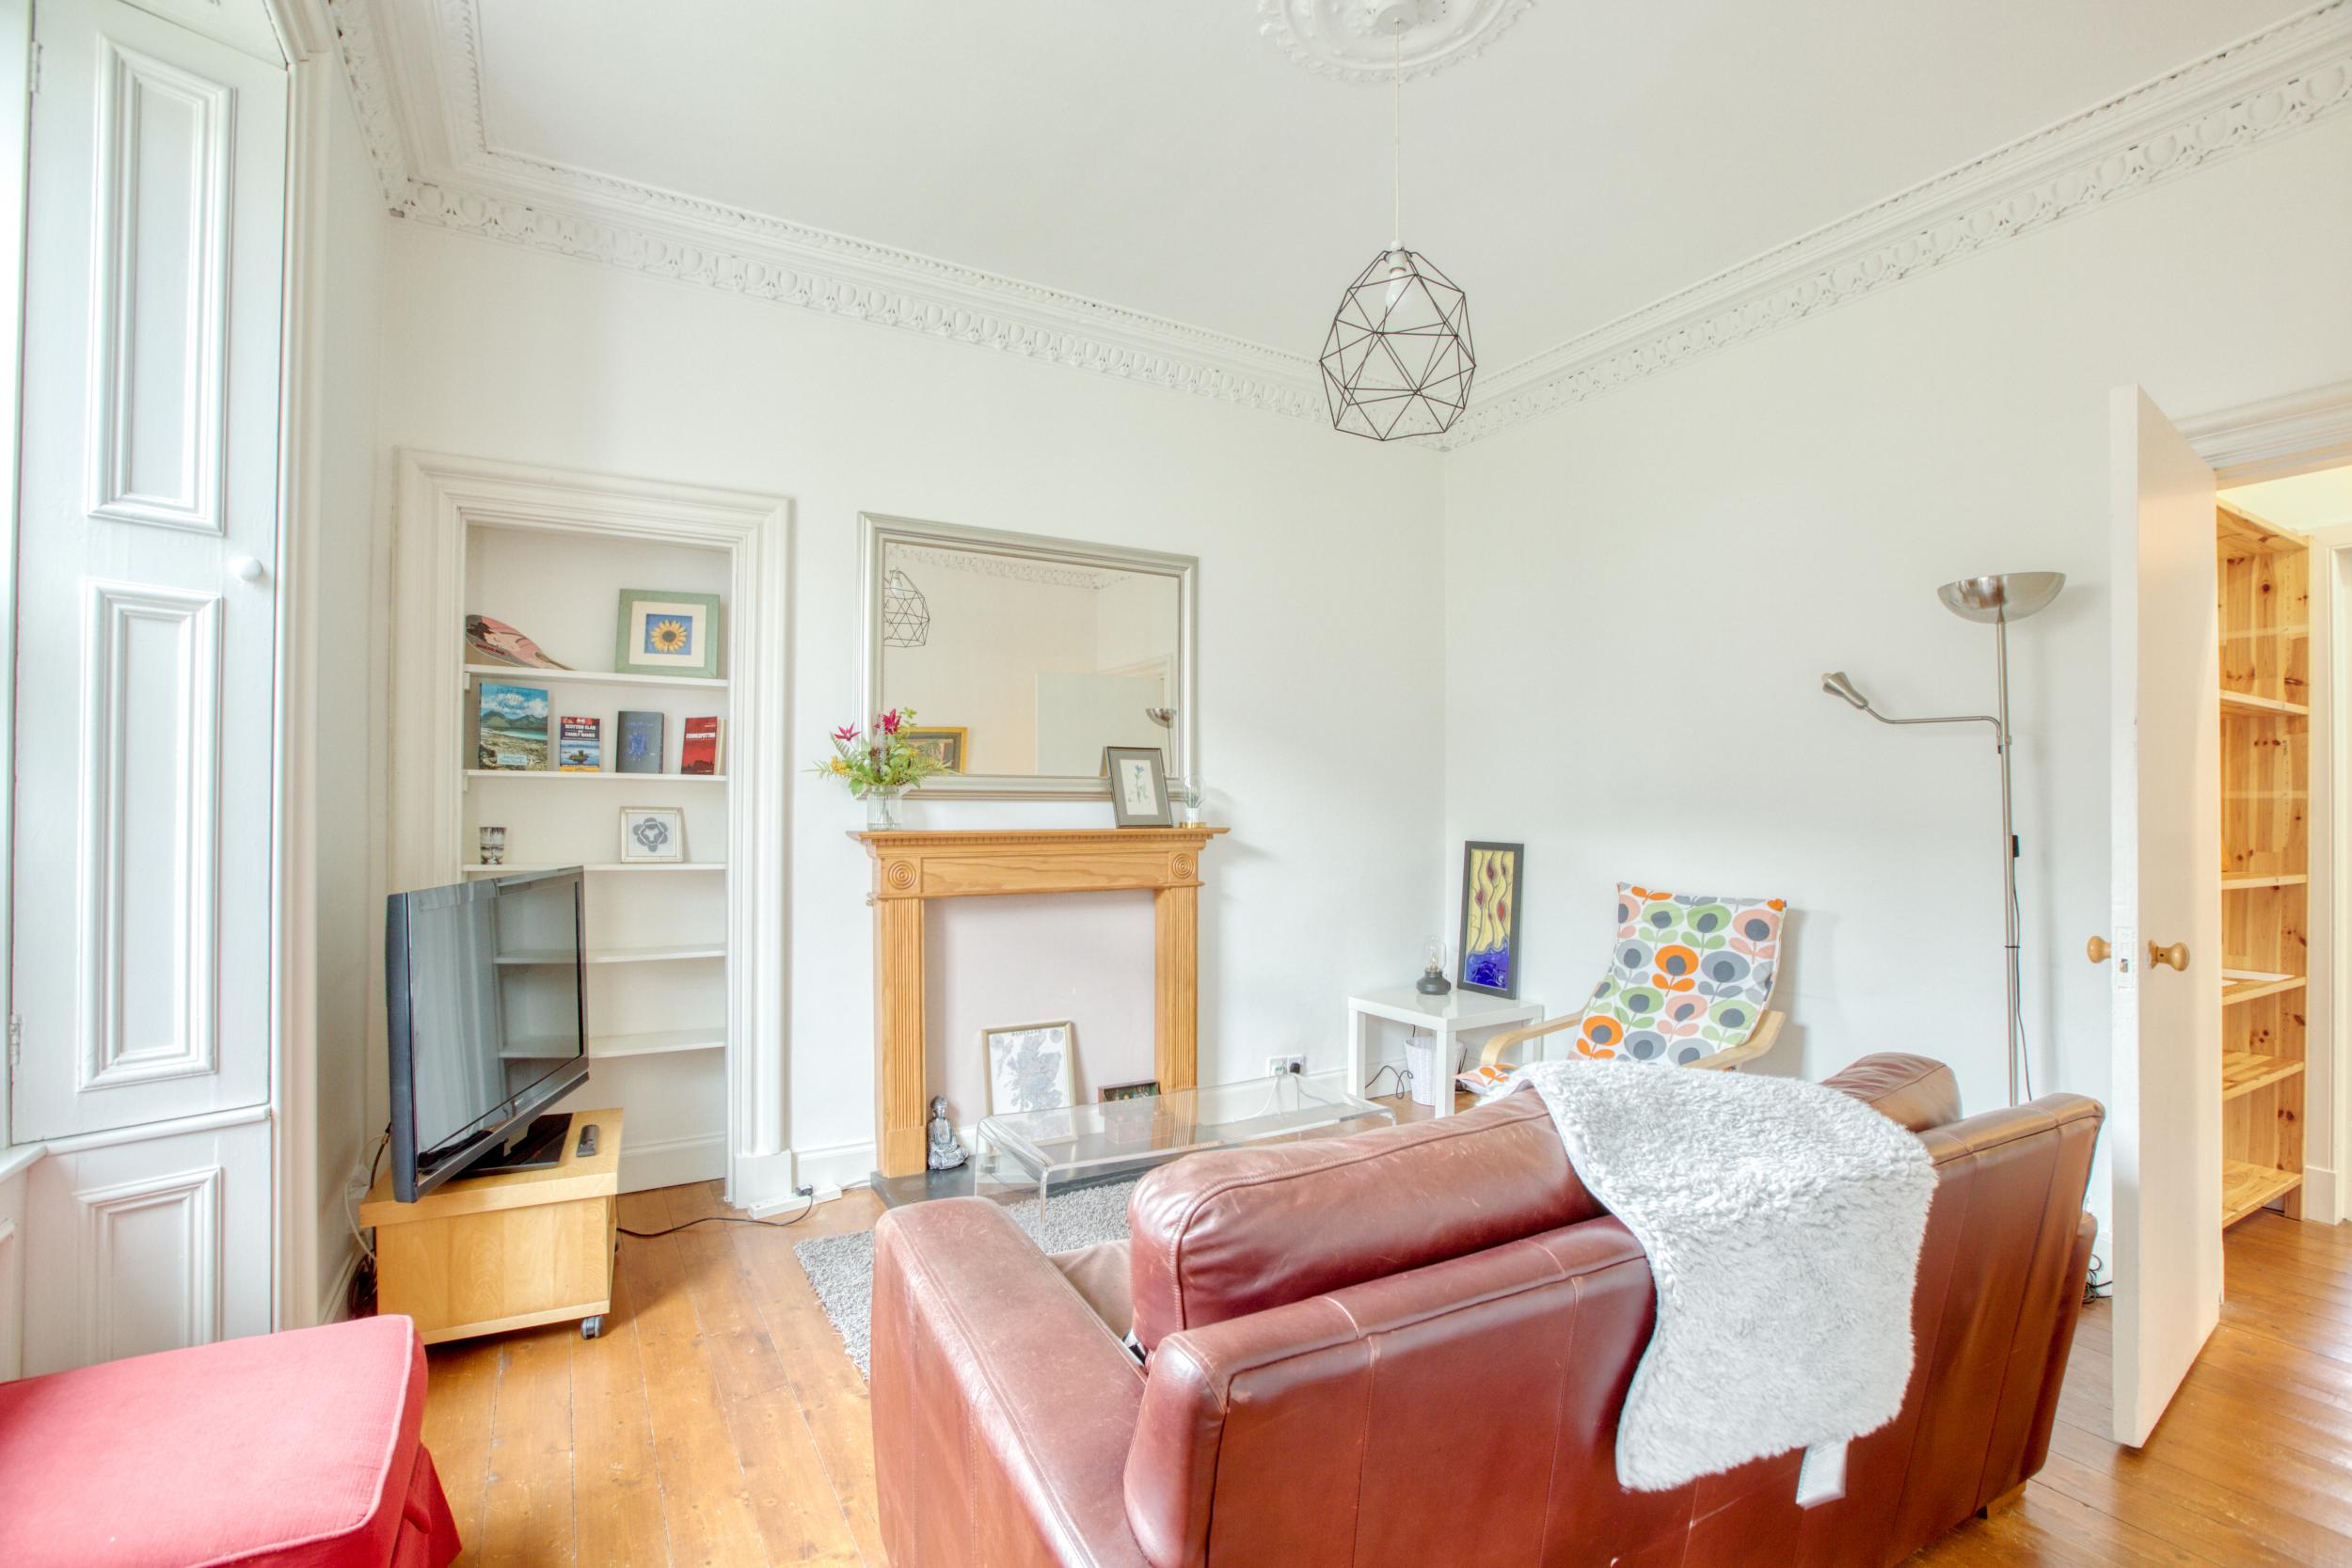 This cosy Shandon residence is within staggering distance of some of the city's best pubs